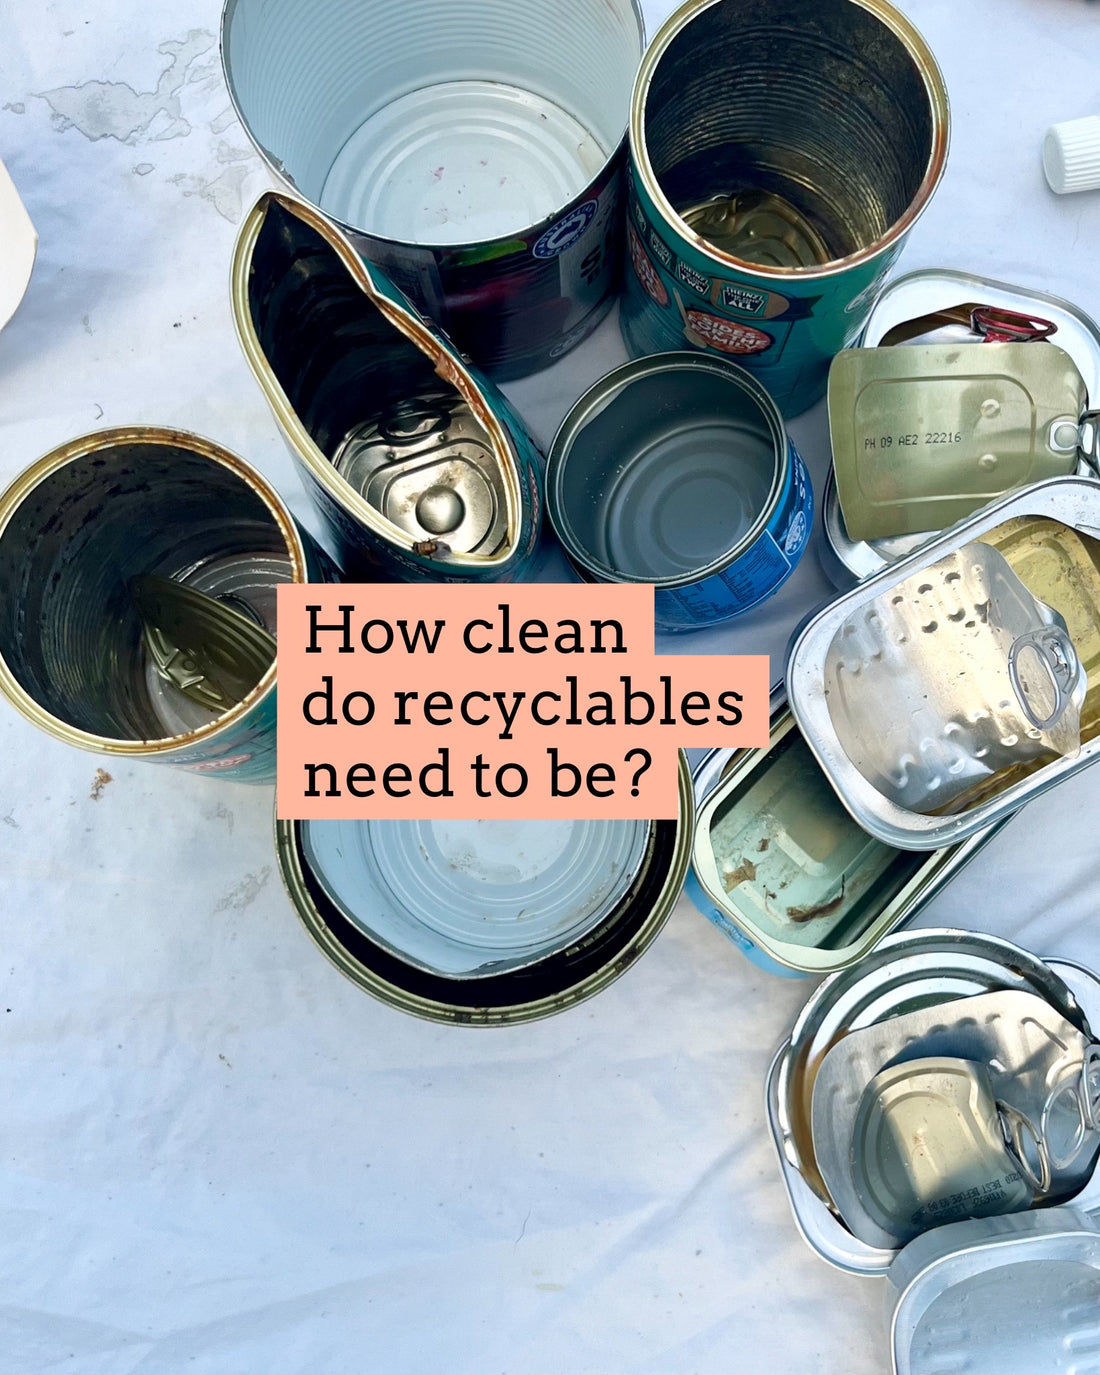 How clean do recyclables need to be?